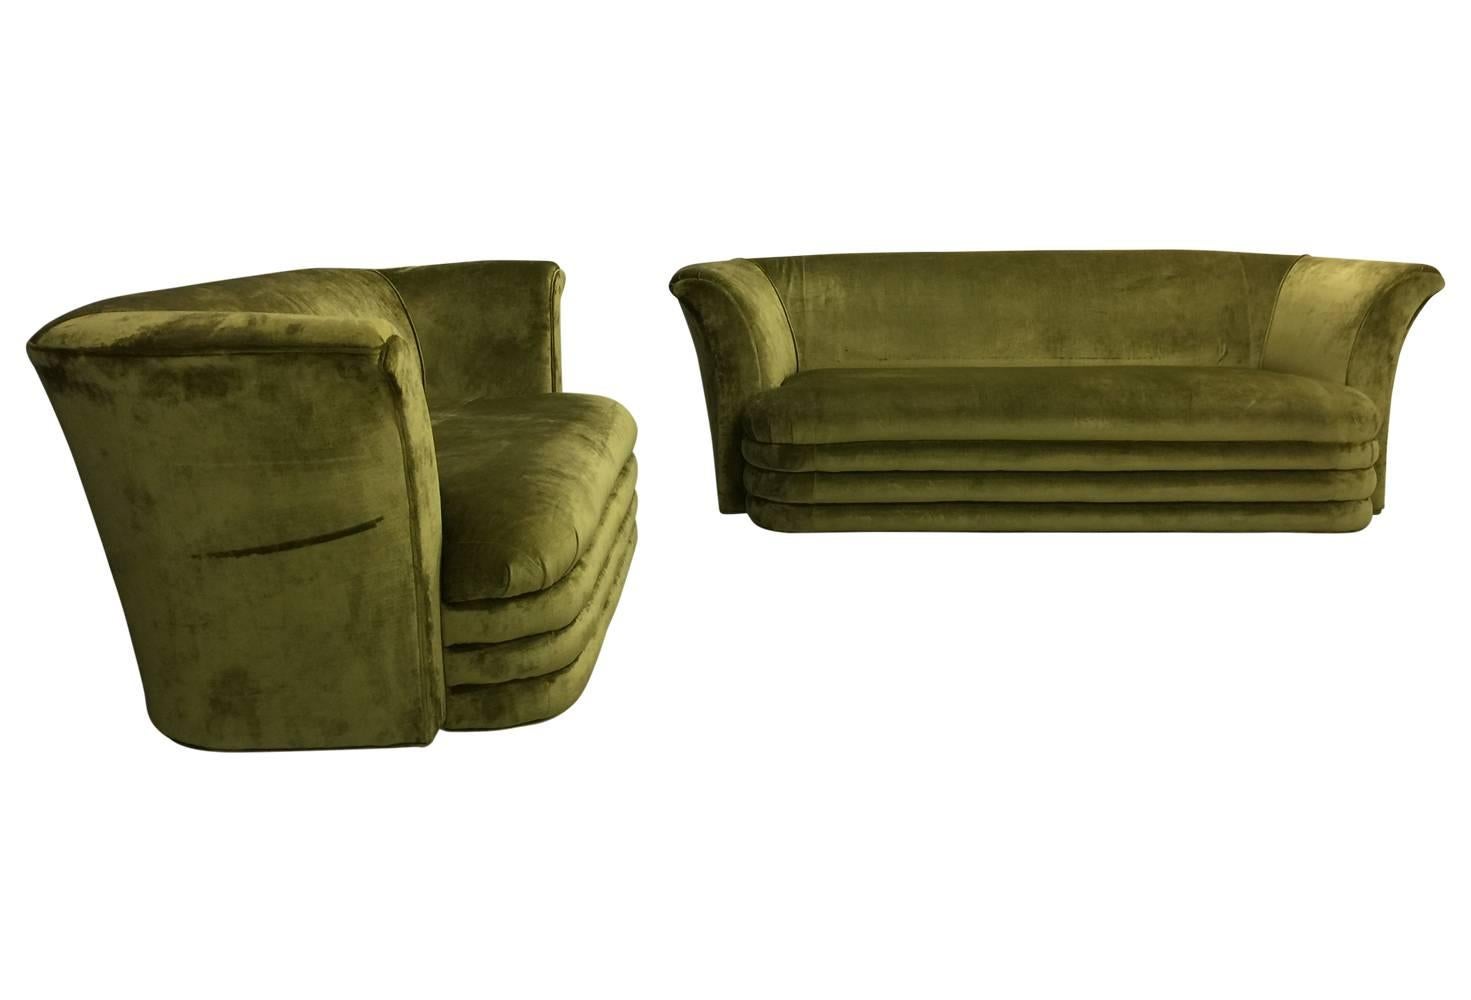 Gorgeous midcentury sofa and loveseat with streamlined moderne Art Deco styling. Lovely chartreuse green crushed velvet upholstery. We'd be happy so sell them individually as well.

Loveseat: 70 wide, 36 deep, 30 tall
Sofa: 82 wide, 36 deep, 30